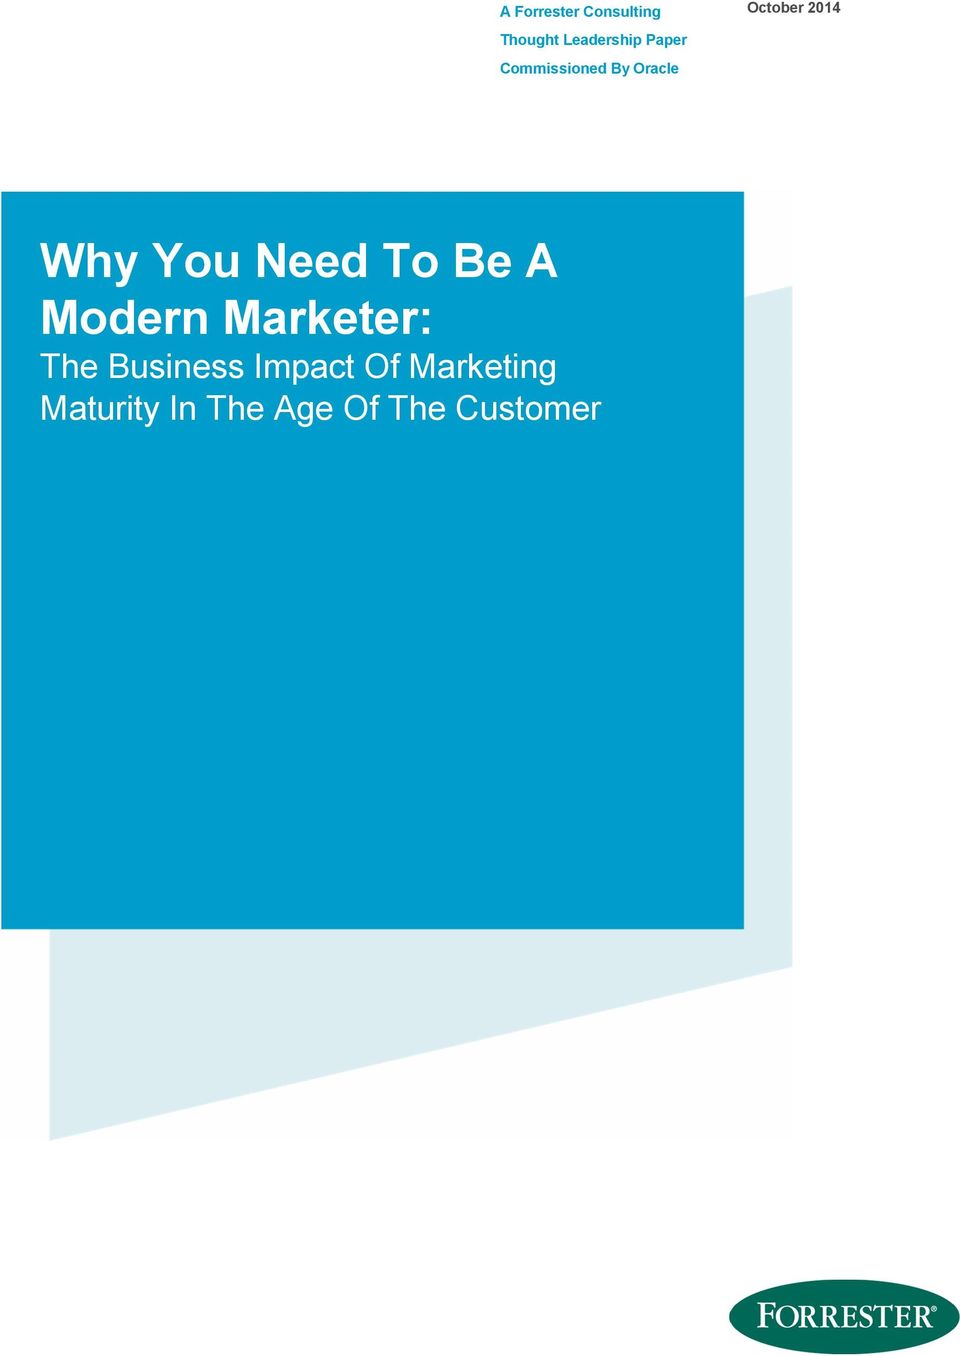 Need To Be A Modern Marketer: The Business